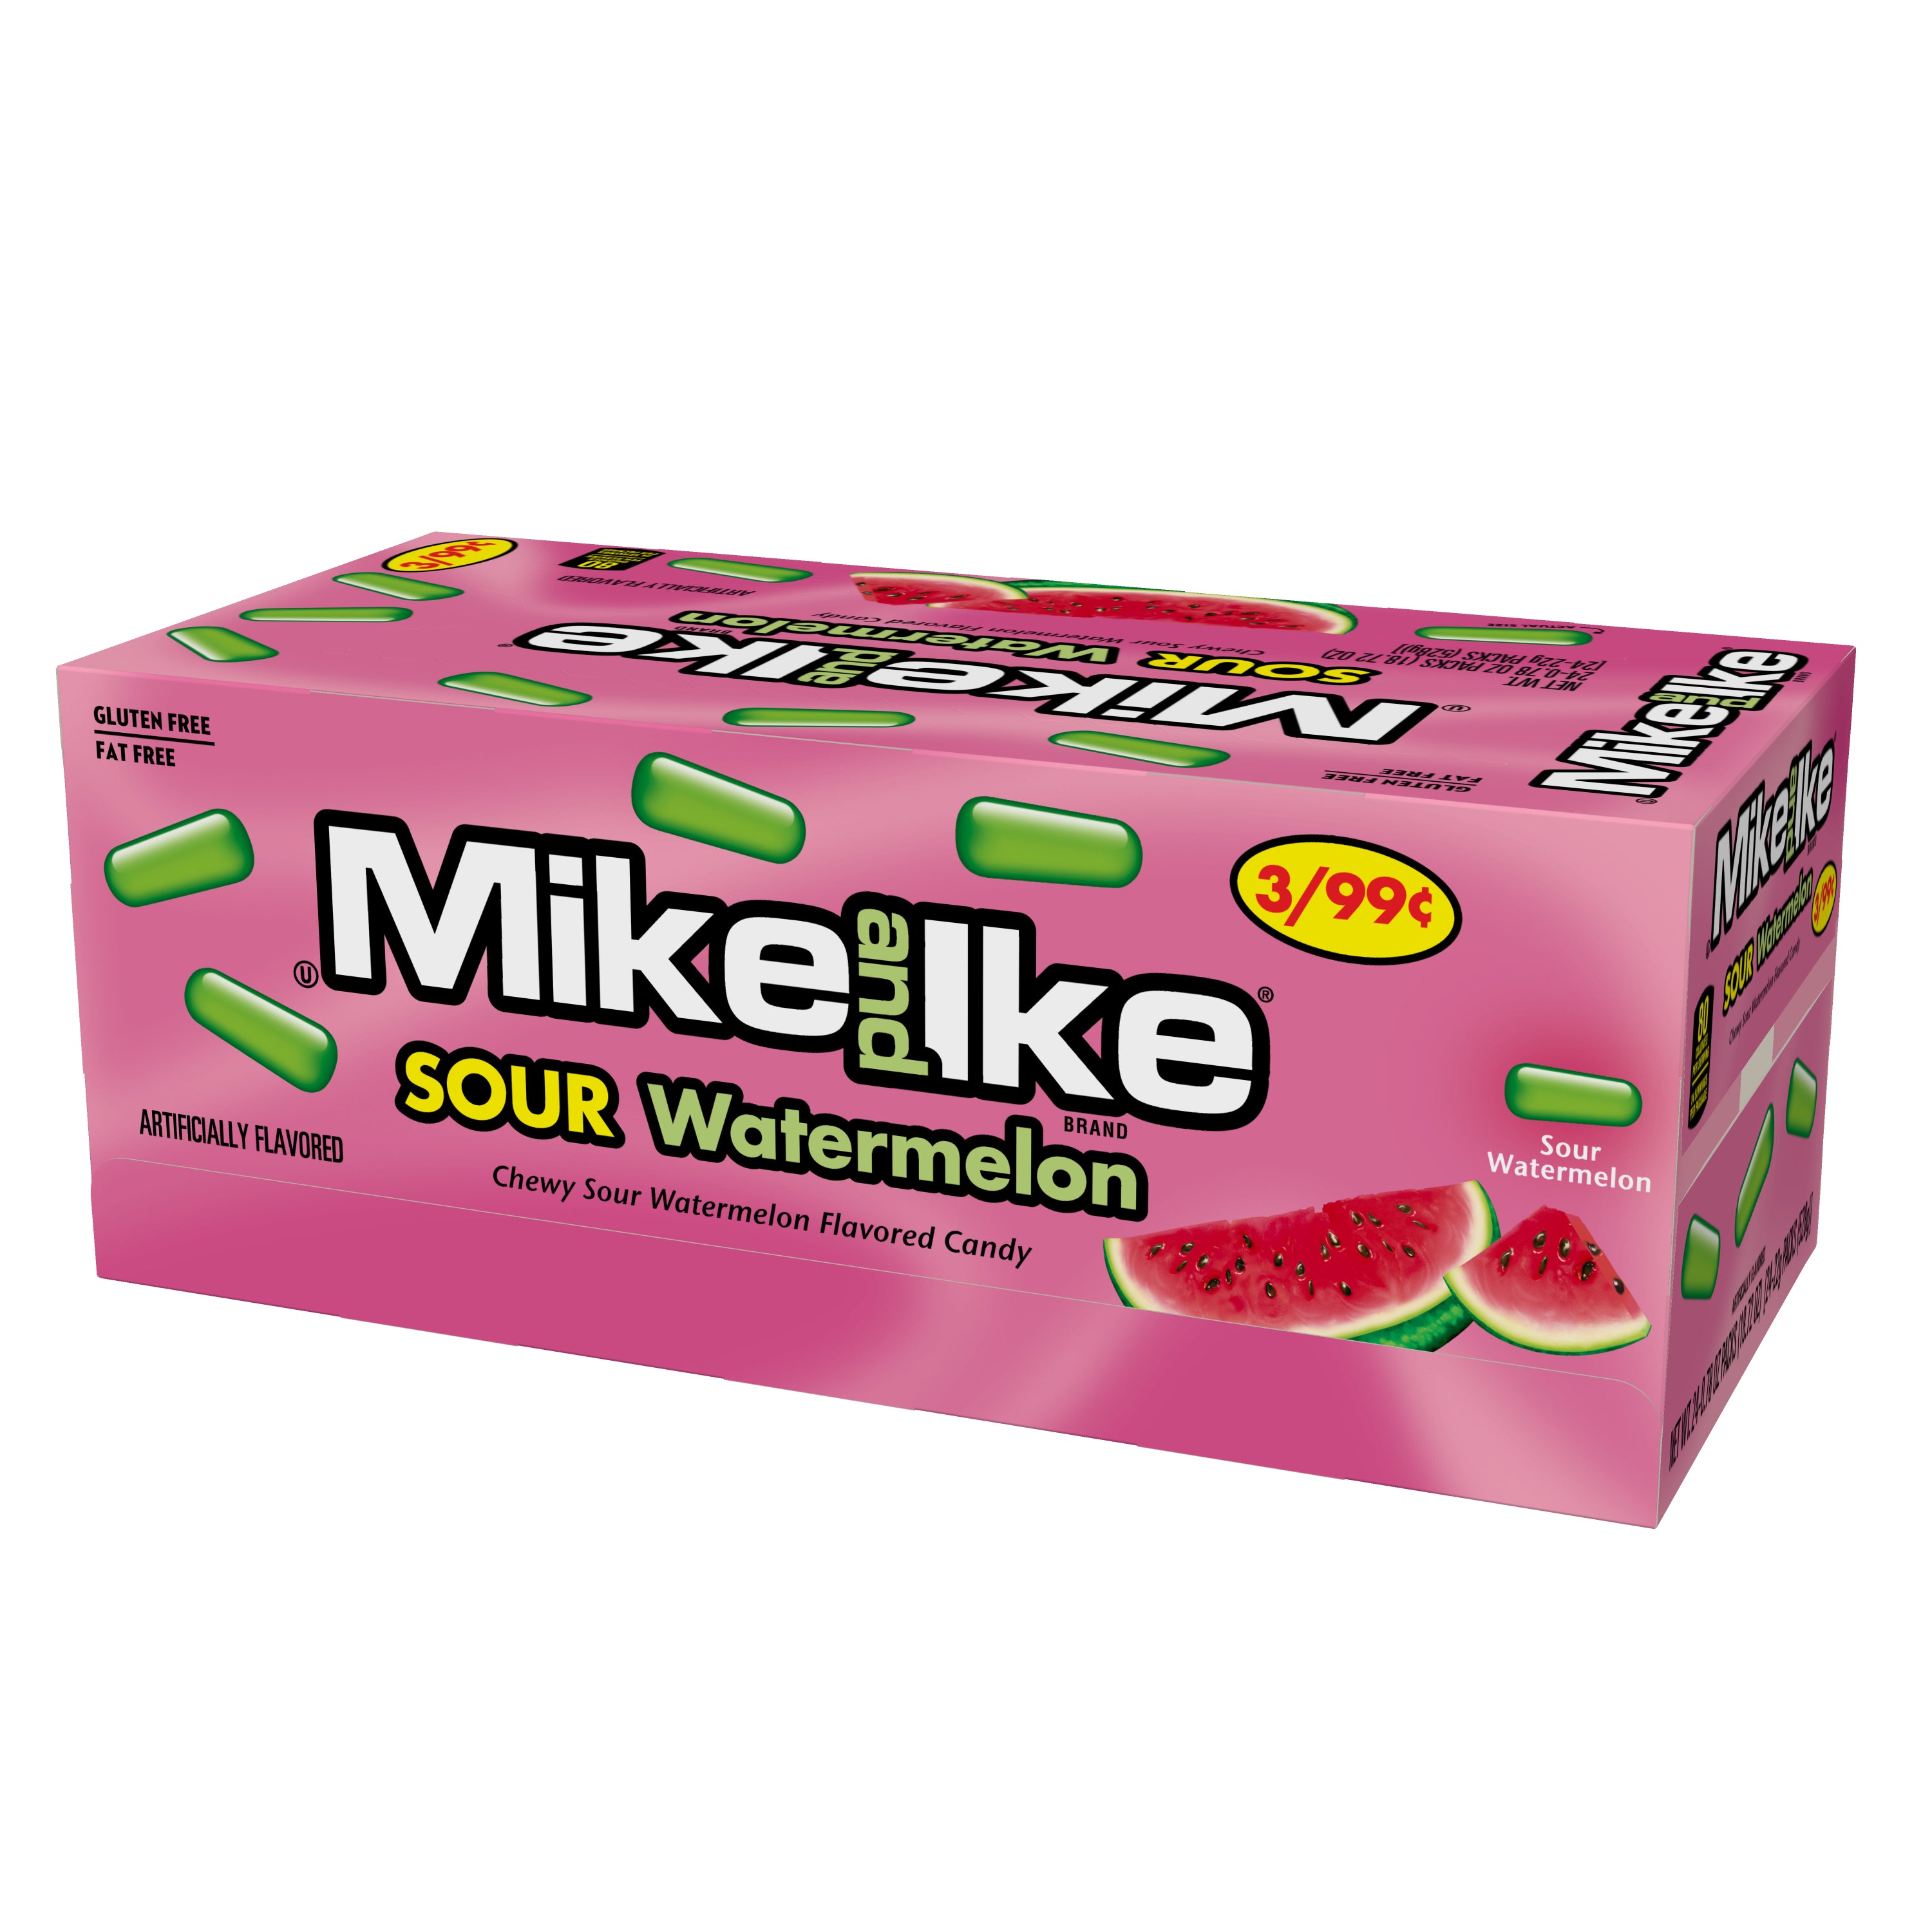 MIKE AND IKE SOUR WATERMELON